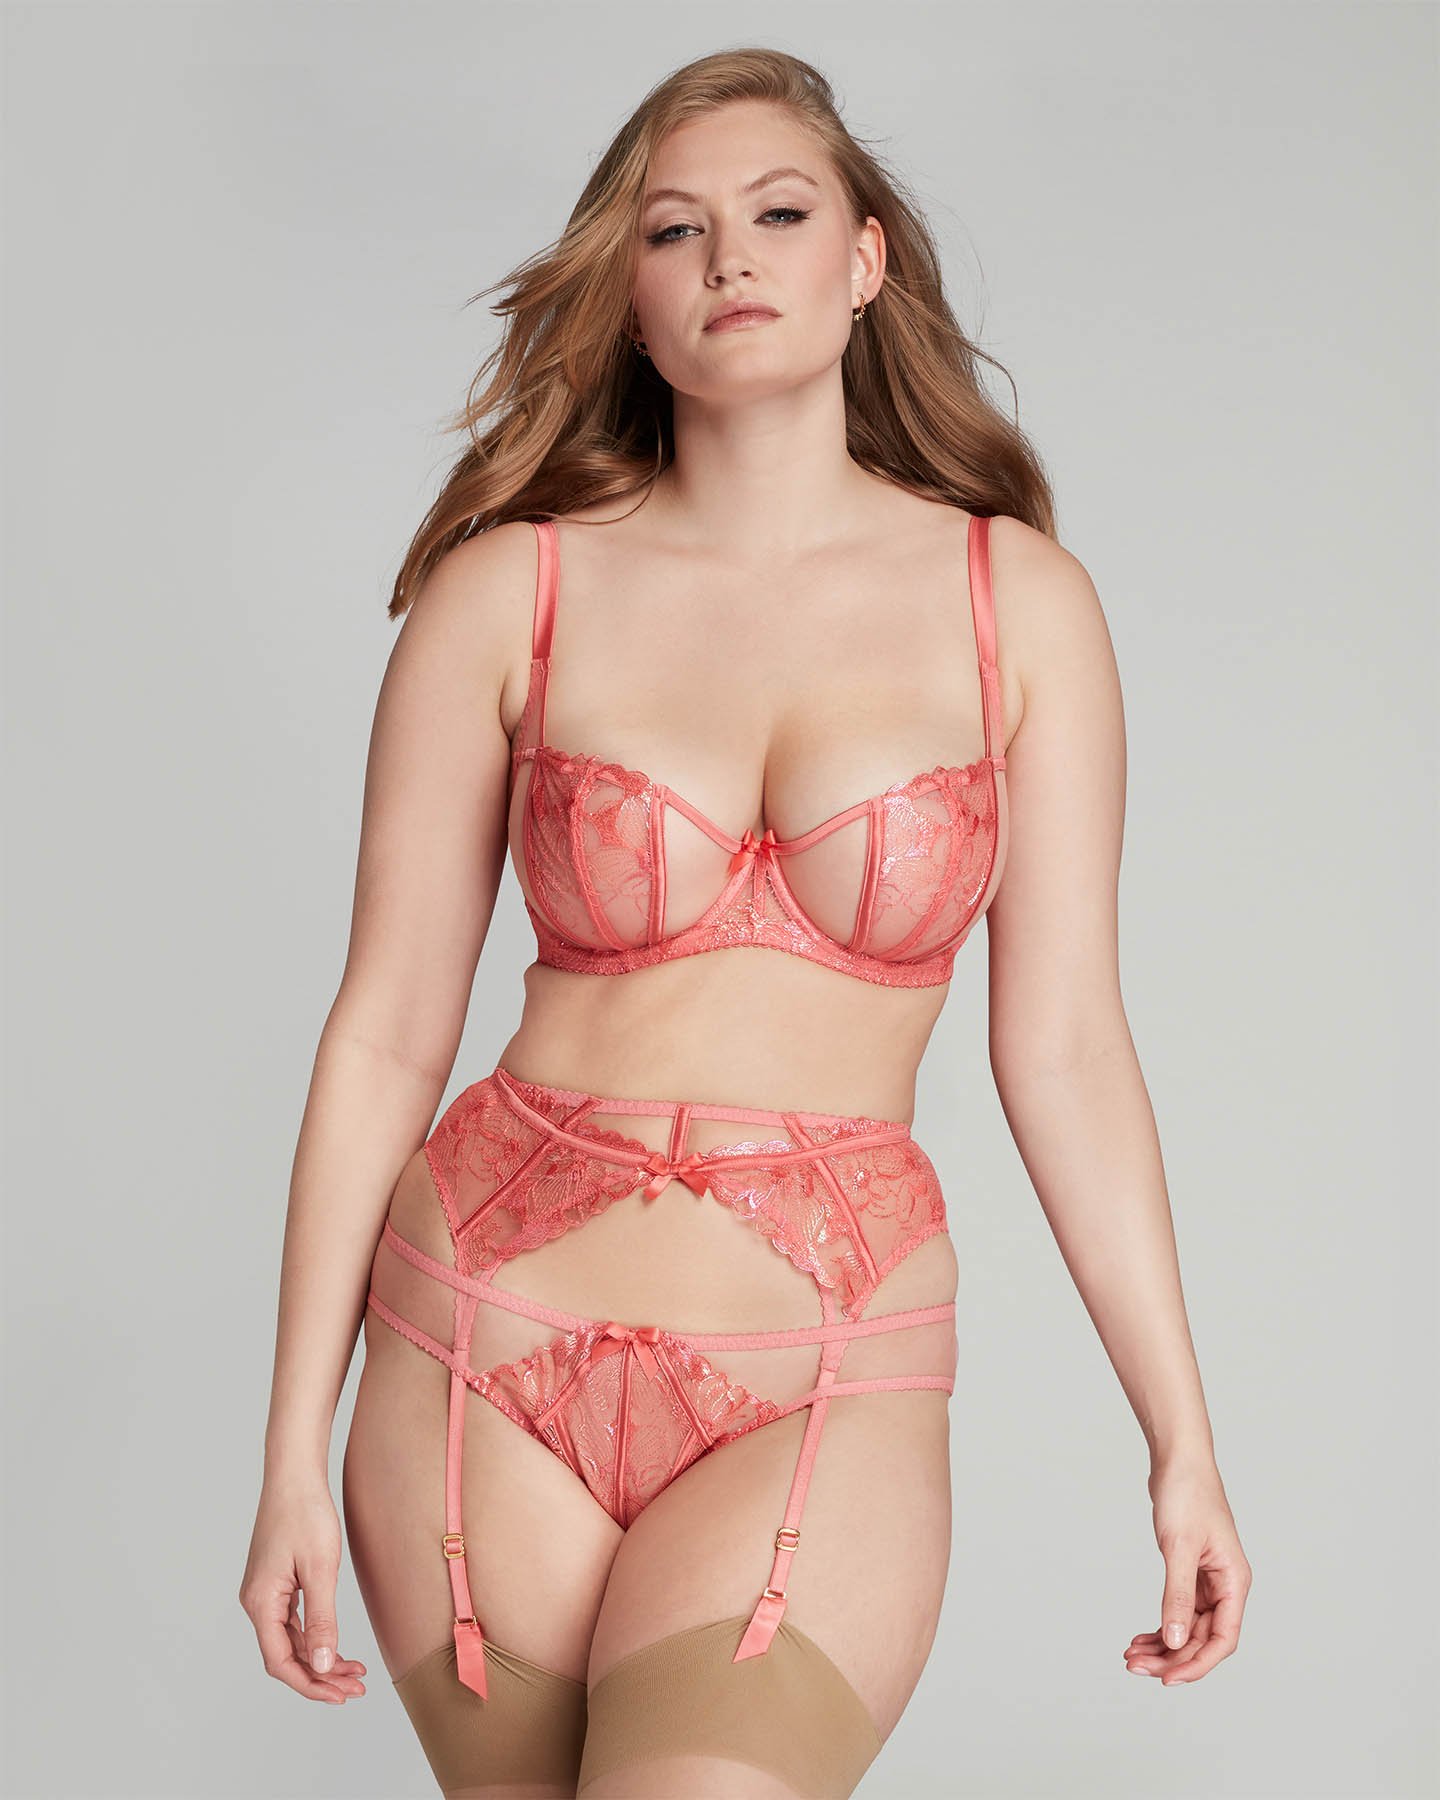 sabinah-suspender-in-coral-by-agent-provocateur-sale